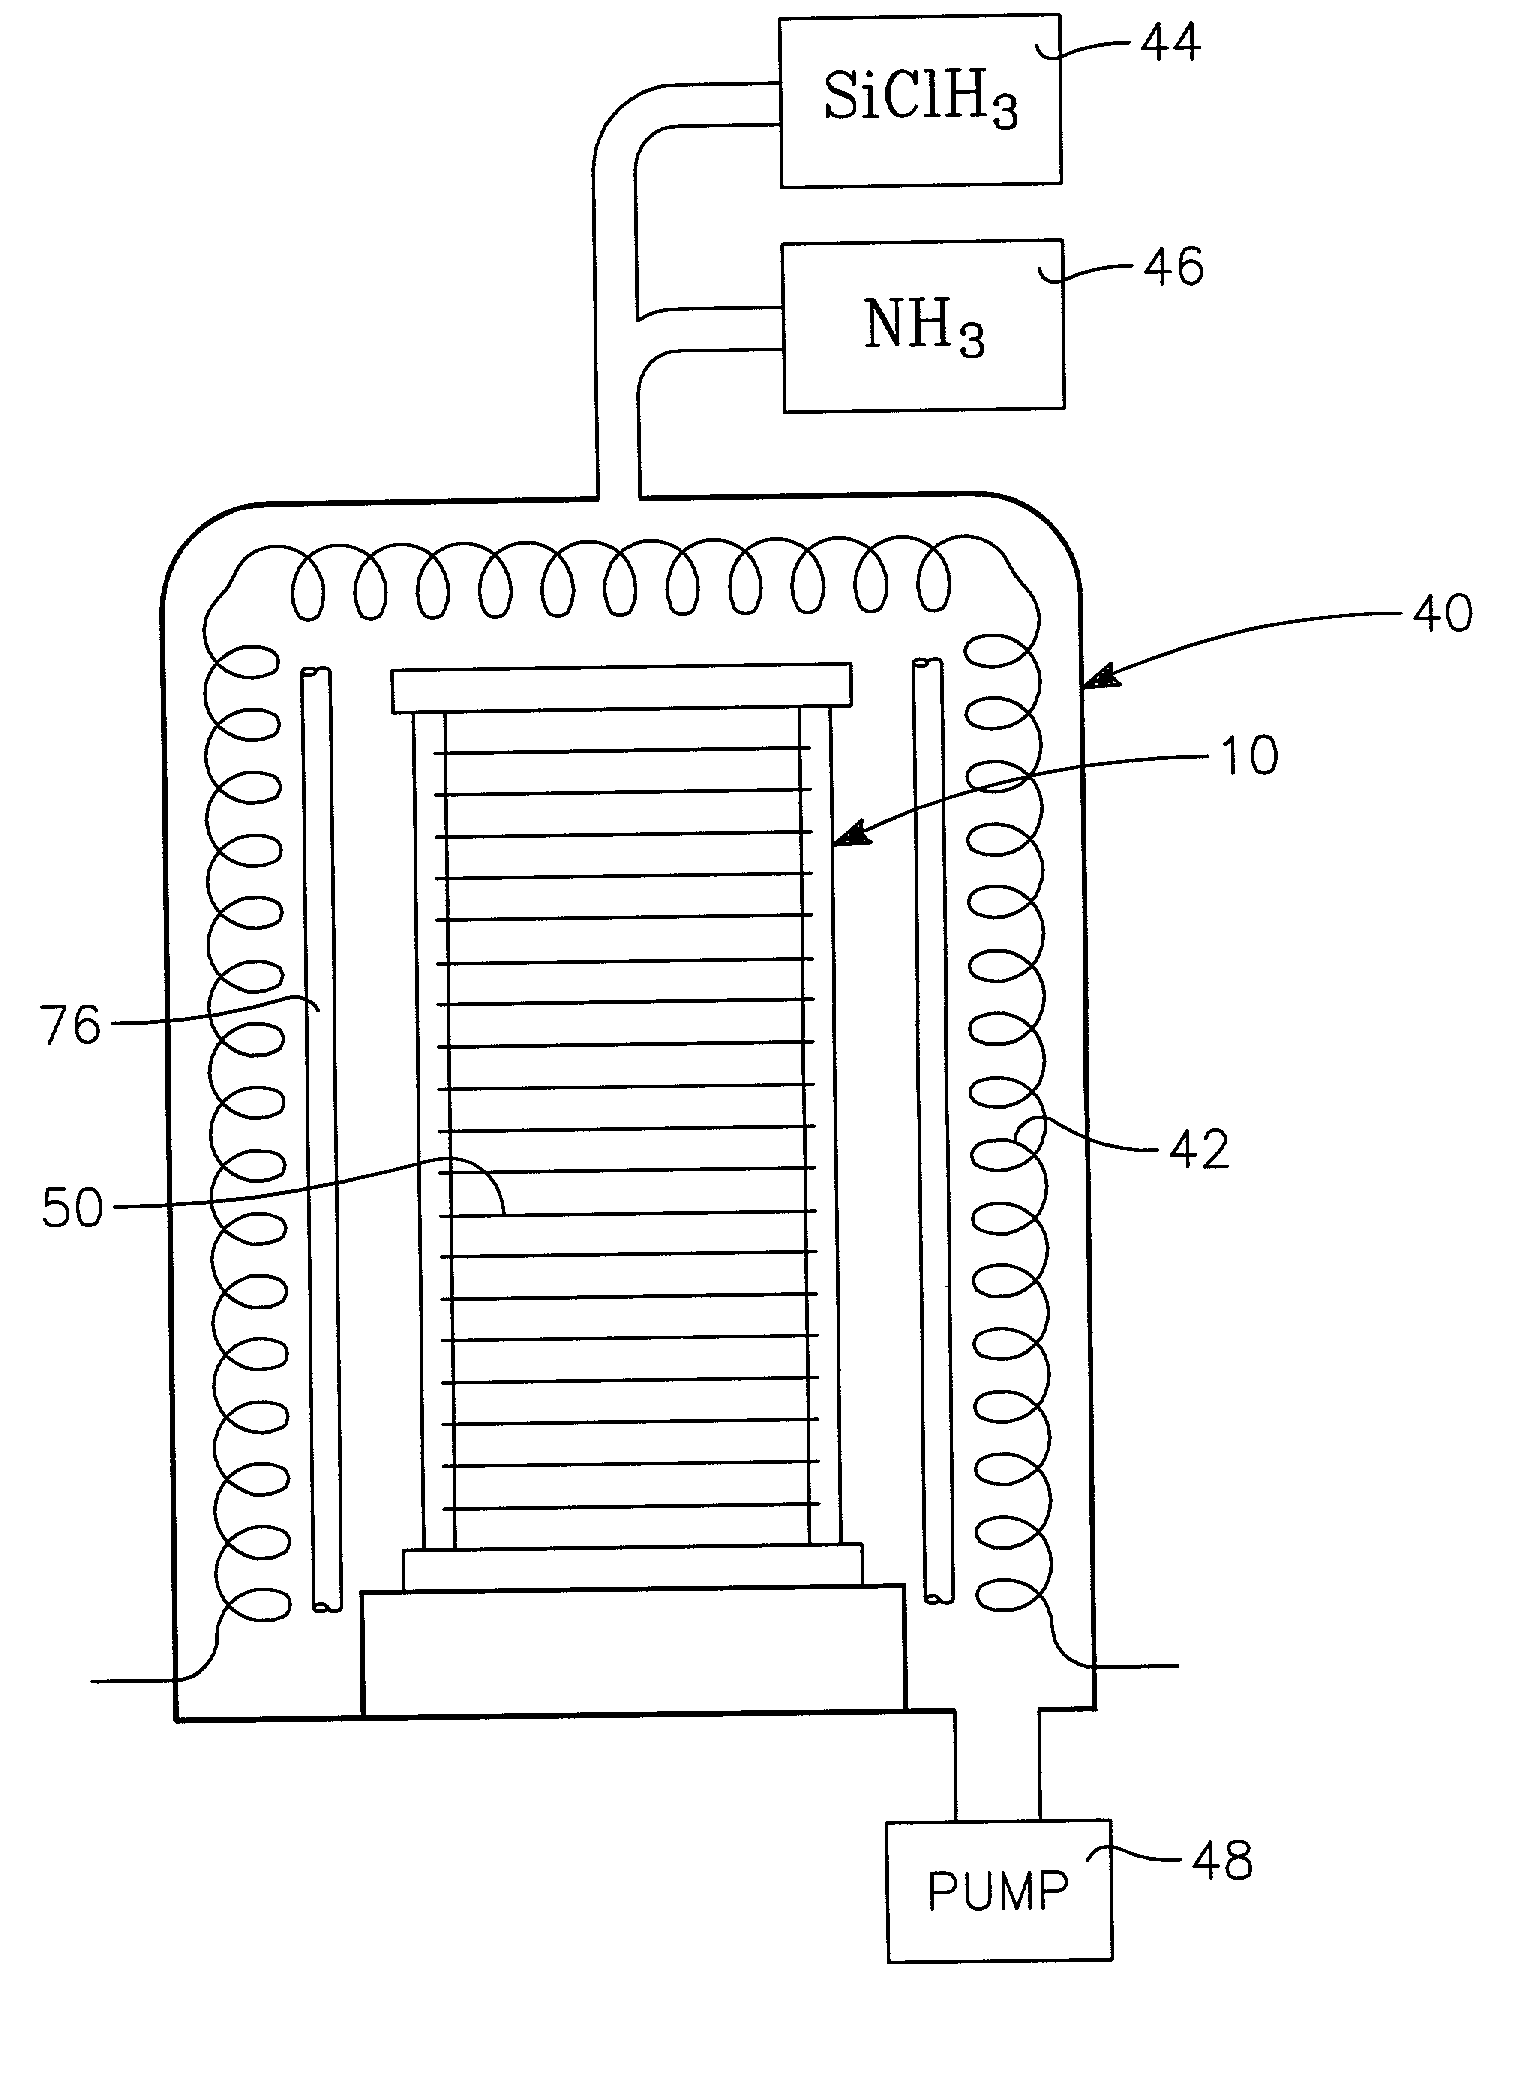 Pre-coated silicon fixtures used in a high temperature process